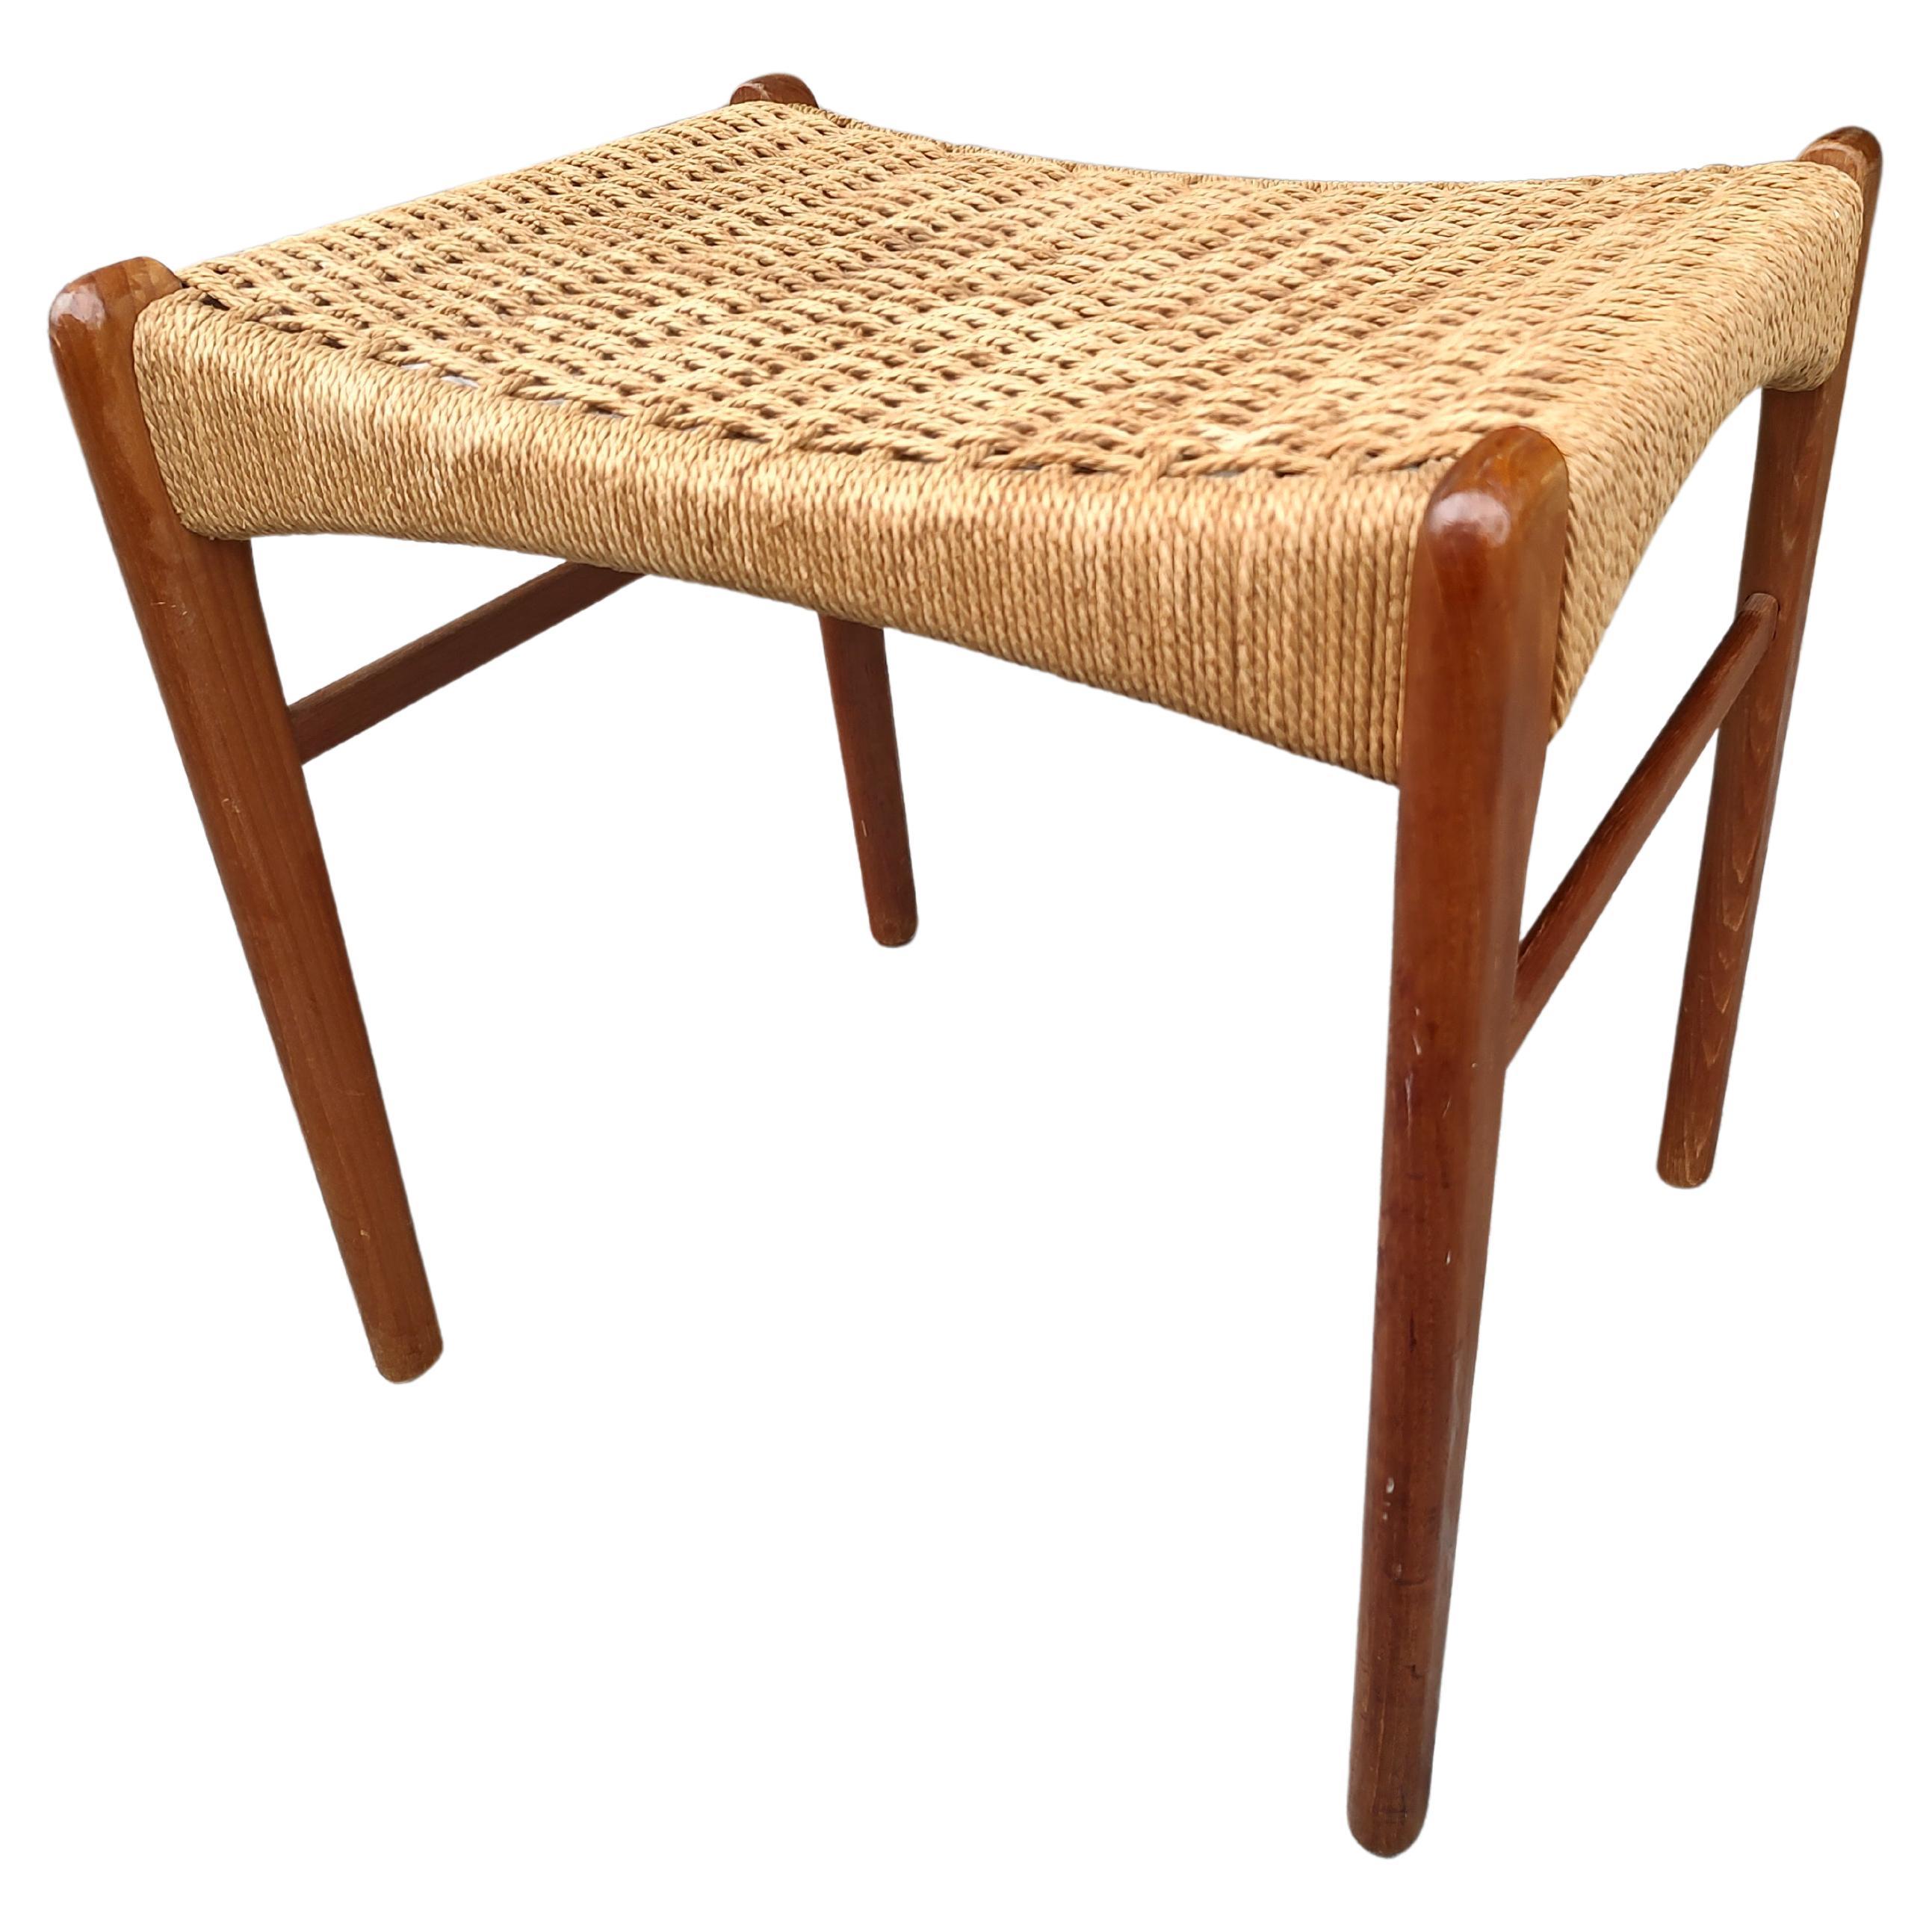 Mid-Century Modern Danish Footstool with Woven Paper Cord Seat, 1960